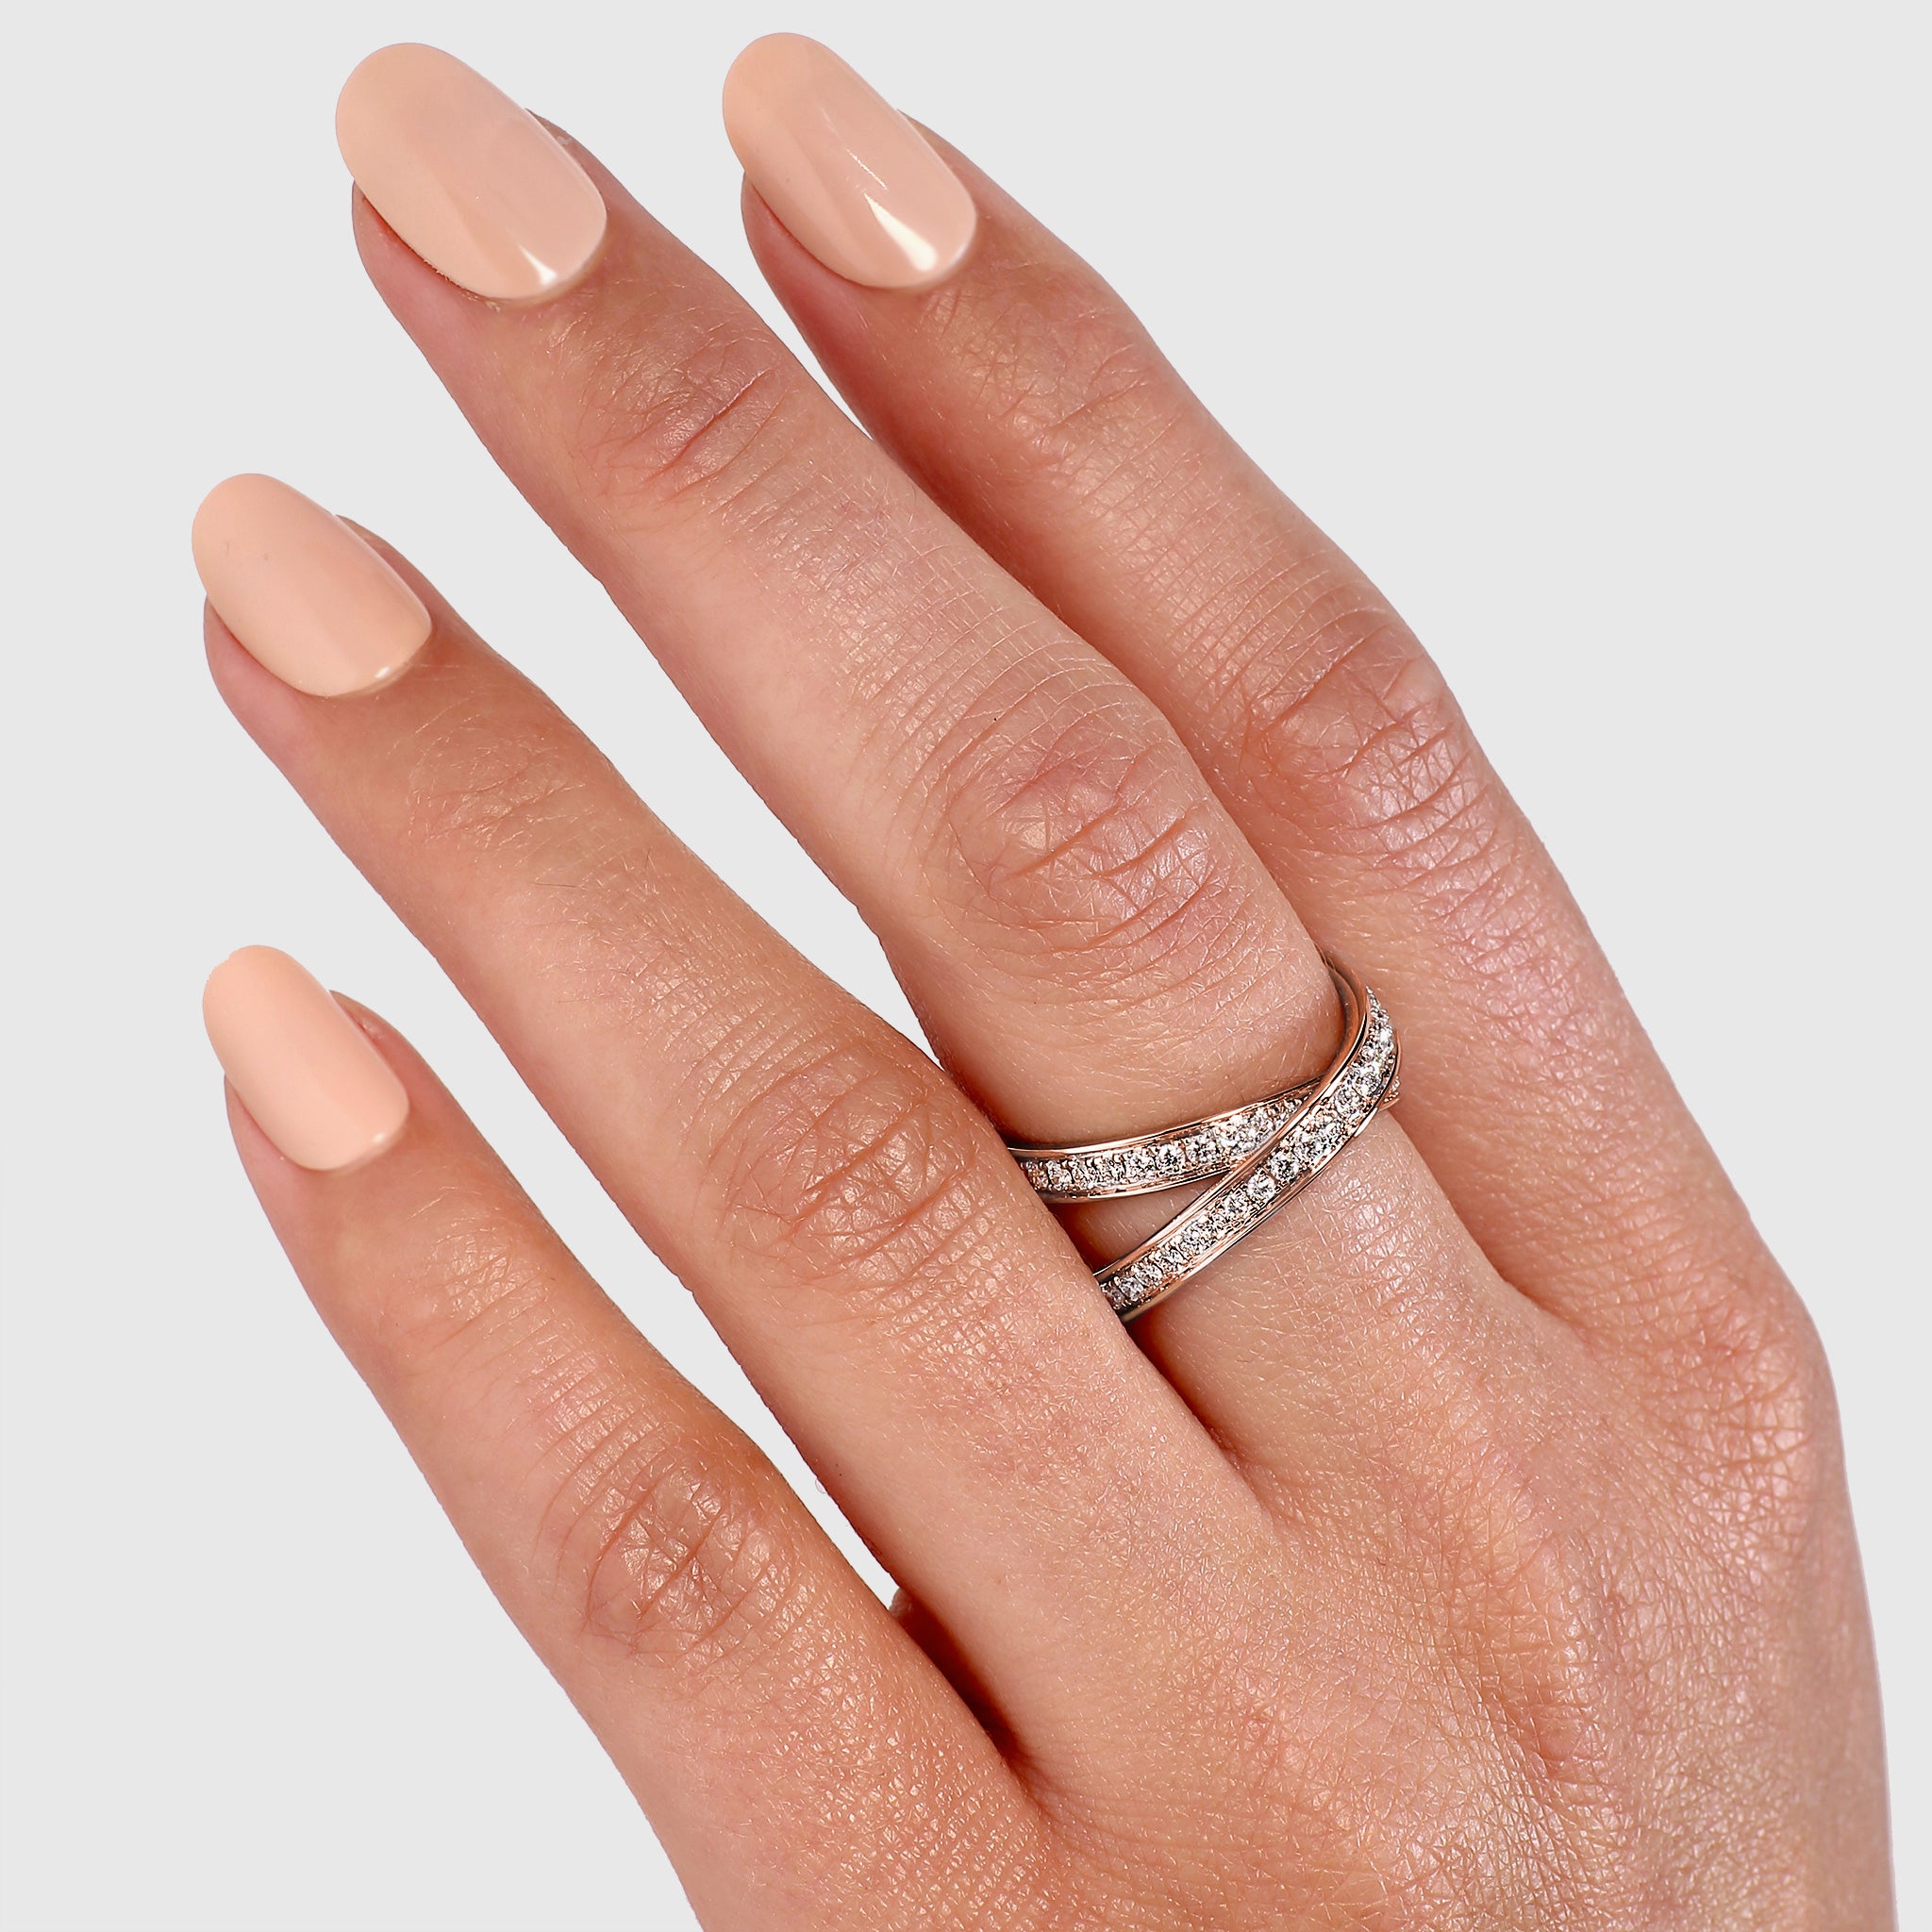 Shimansky - Women Wearing the Infinity Classic Pavé Diamond Ring Crafted in 18K Rose Gold